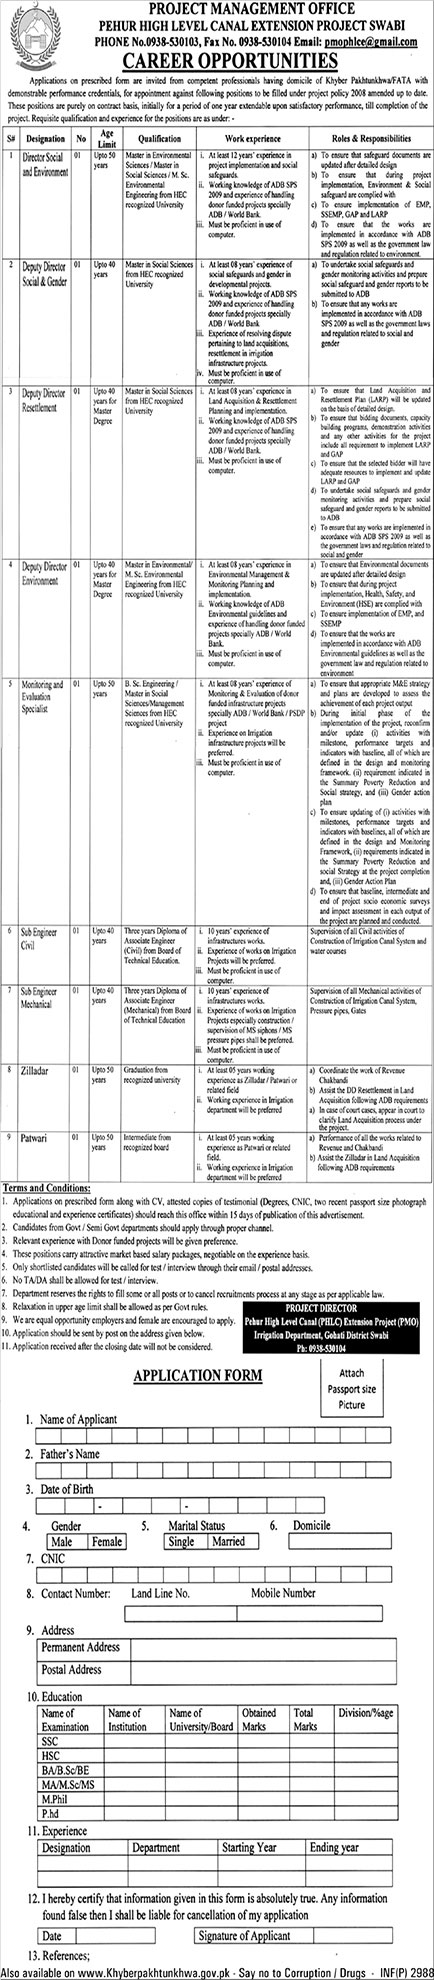 Jobs in Department of KPK Project Management Office 07 July 2018